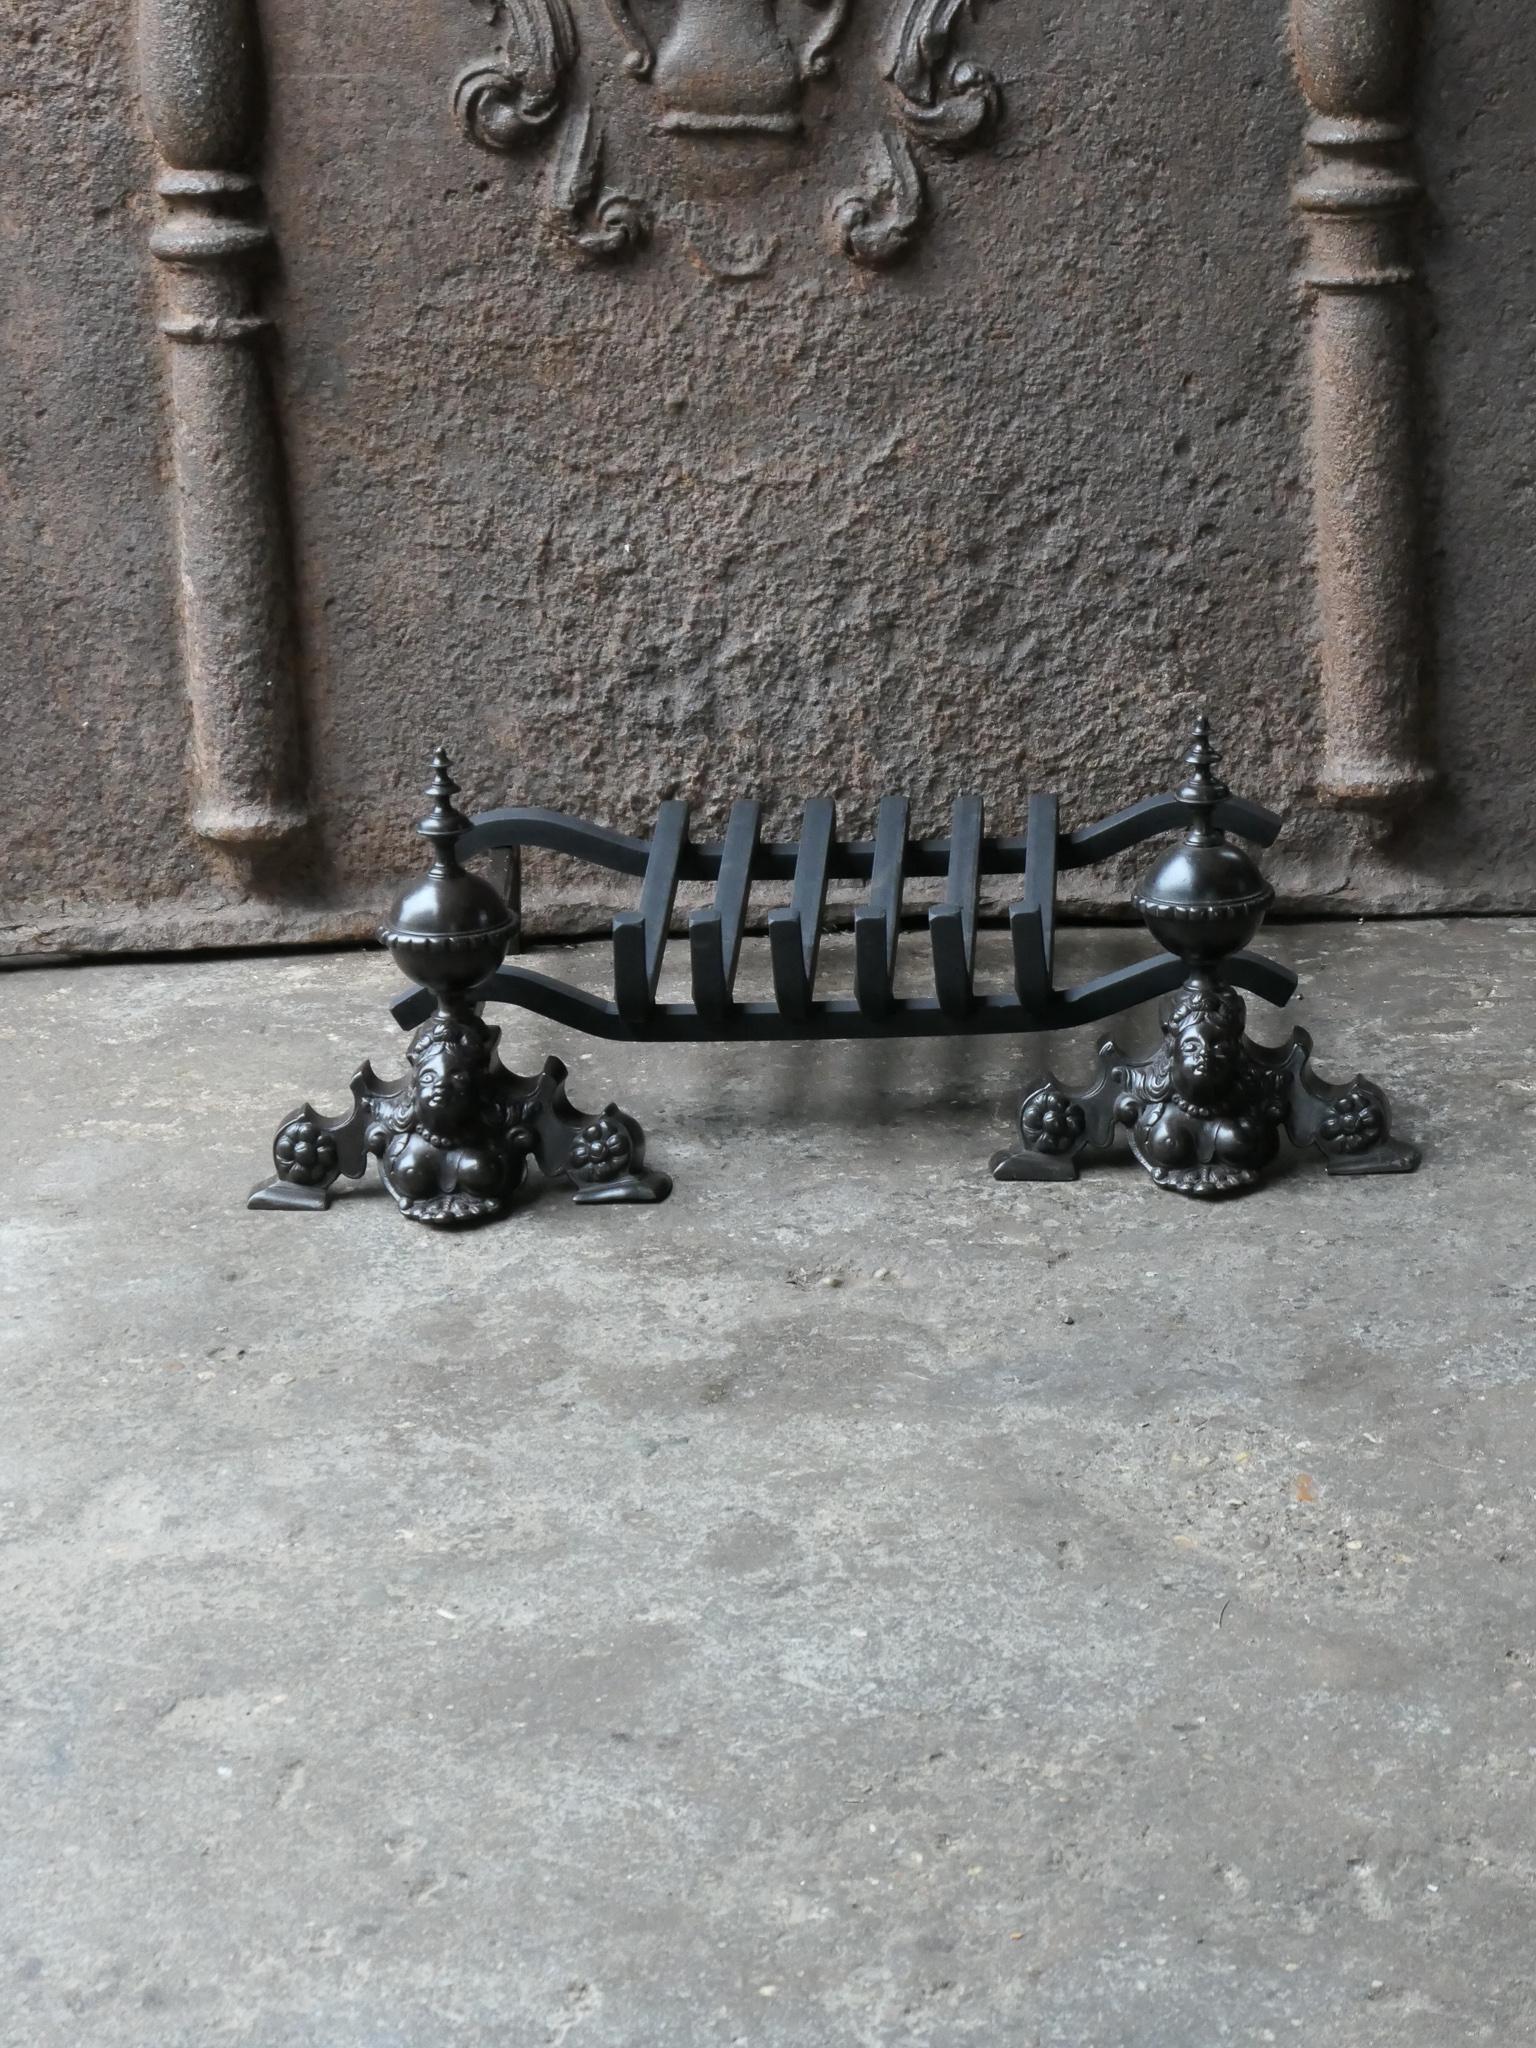 French 17th century fireplace basket or fire grate from the Louis XIV period. The fireplace grate is made of wrought iron and brass. The condition is good.



















 